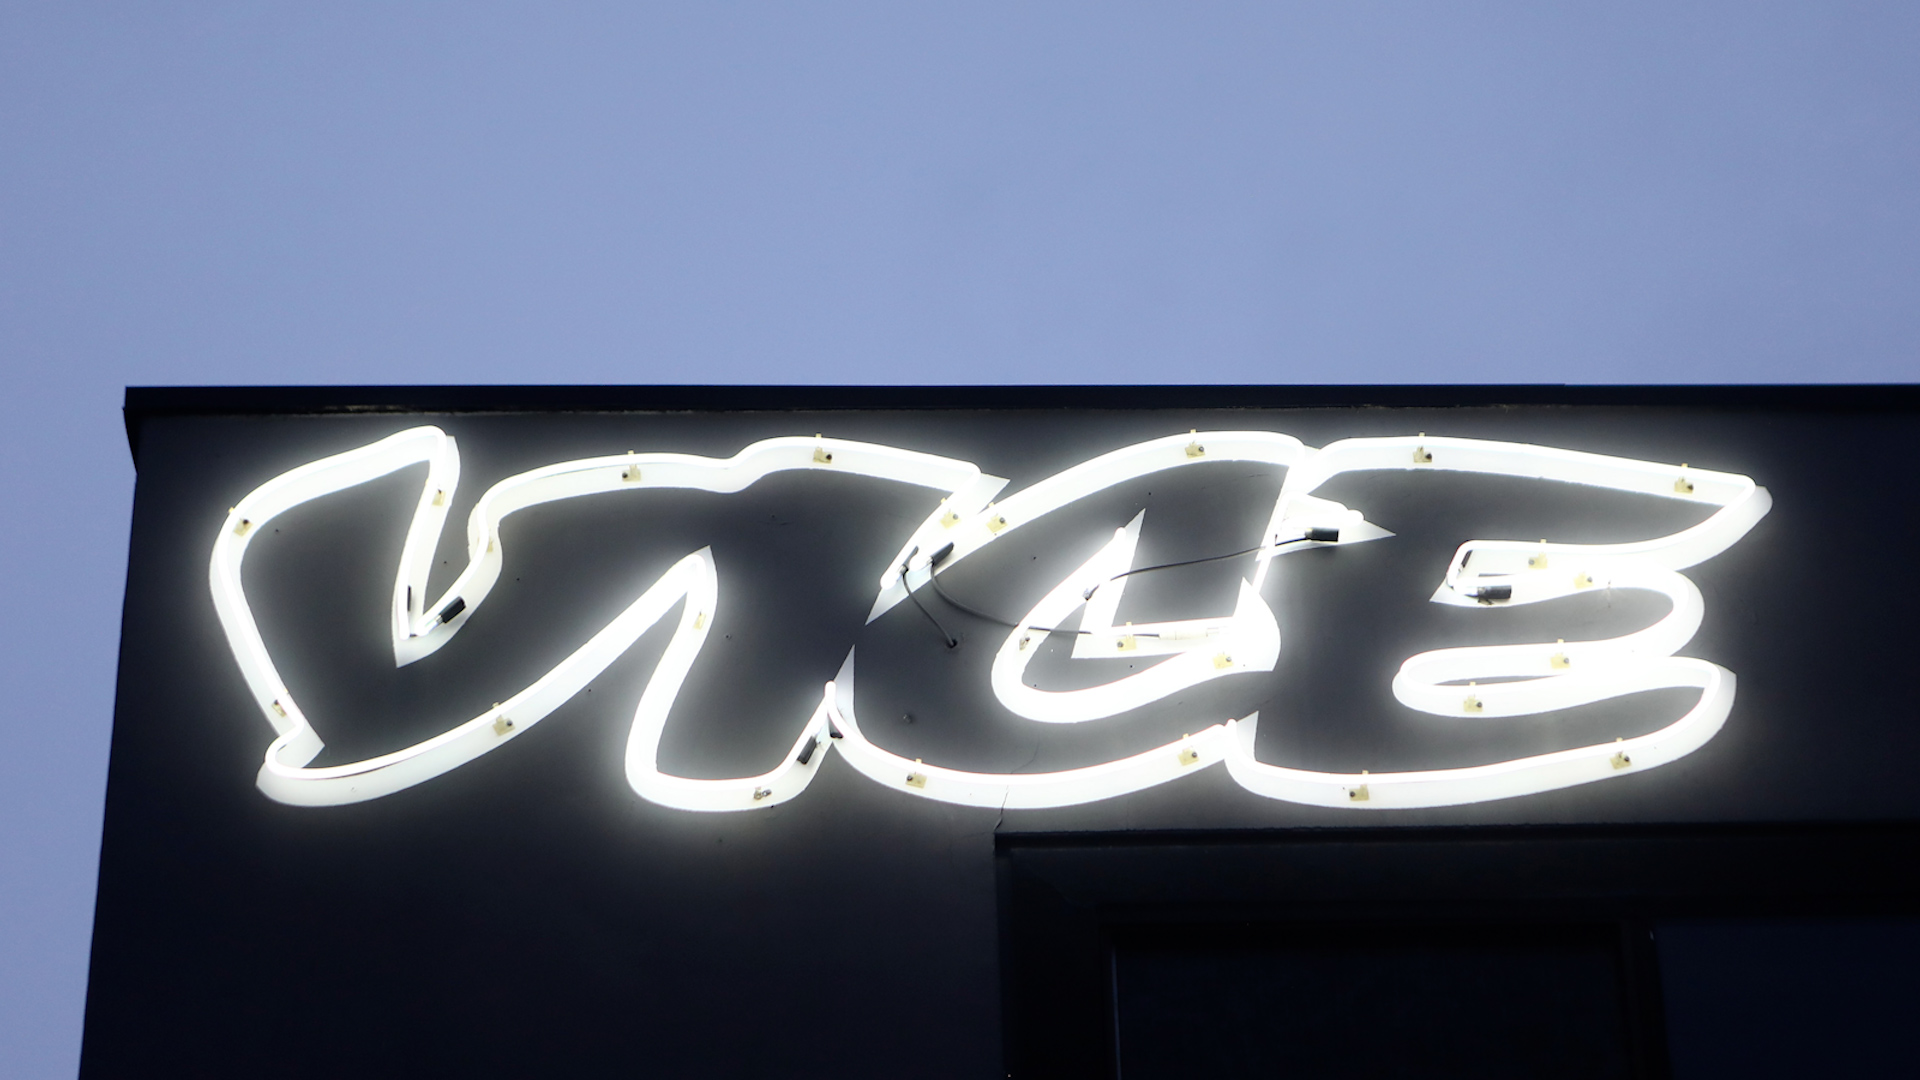 Vice Media, once valued at over  billion and known for its edgy, immersive storytelling, is laying off hundreds from its staff of more than 900 employees. CEO Bruce Dixon announced the company will also cease publishing on its Vice.com website, a move reflective of Vice's strategic pivot amid financial struggles, including a bankruptcy filing last year before being sold for 0 million to a consortium led by Fortress Investment Group. 